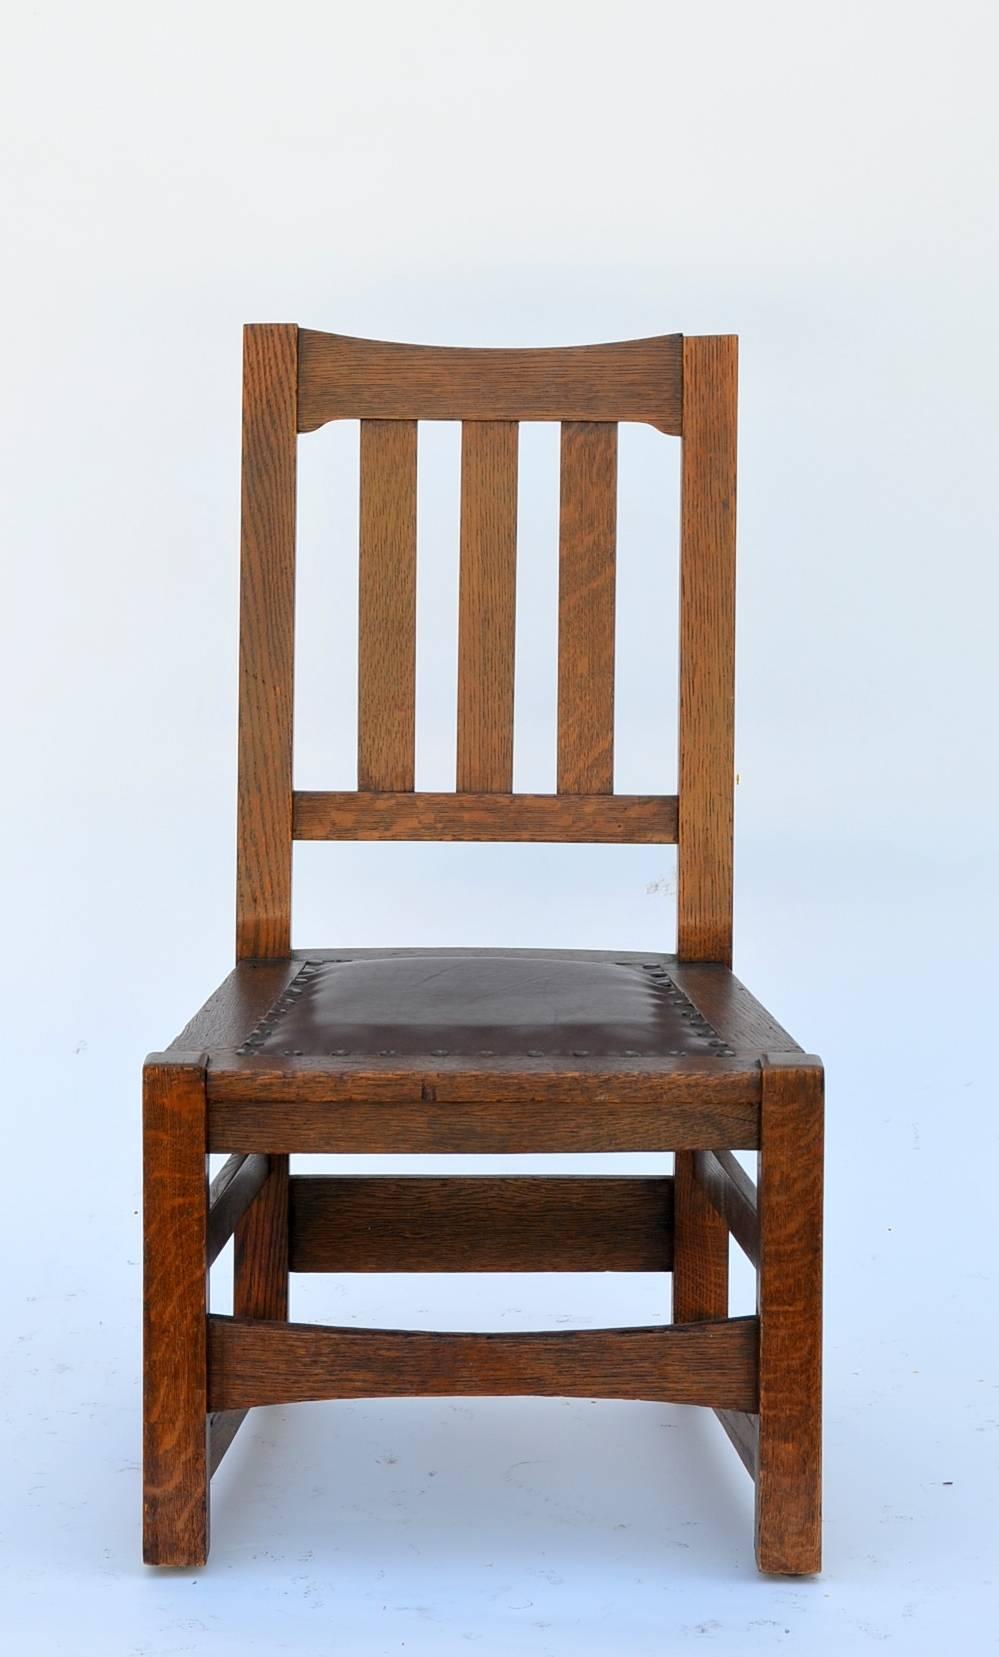 Petite Mission style Arts & Crafts low chair by Stickley Brothers.